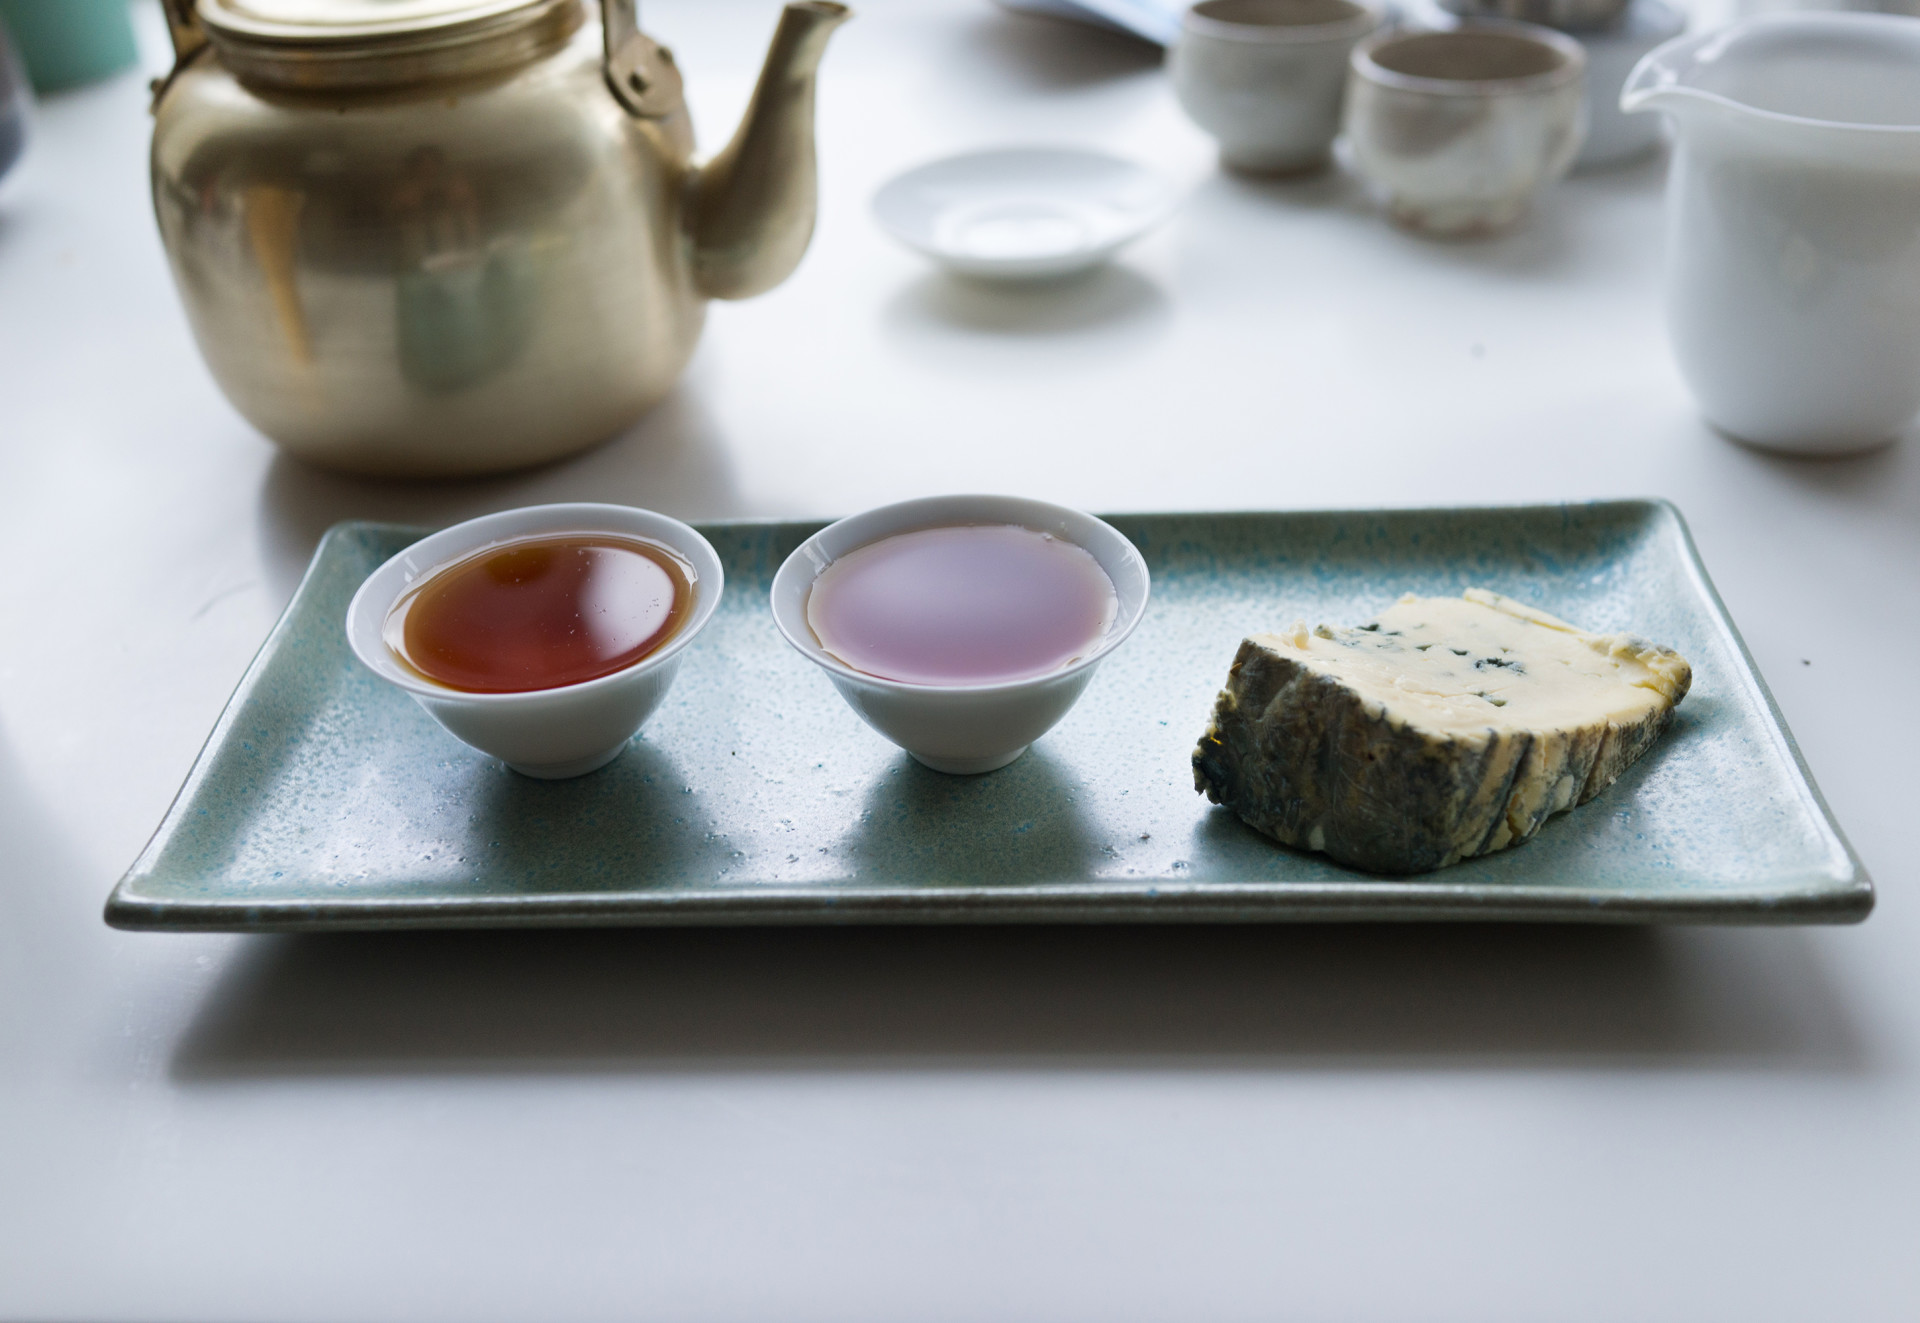 Enjoying wine with cheese is common, but black tea also goes surprisingly well with chiriboga blue cheese, as shown here.